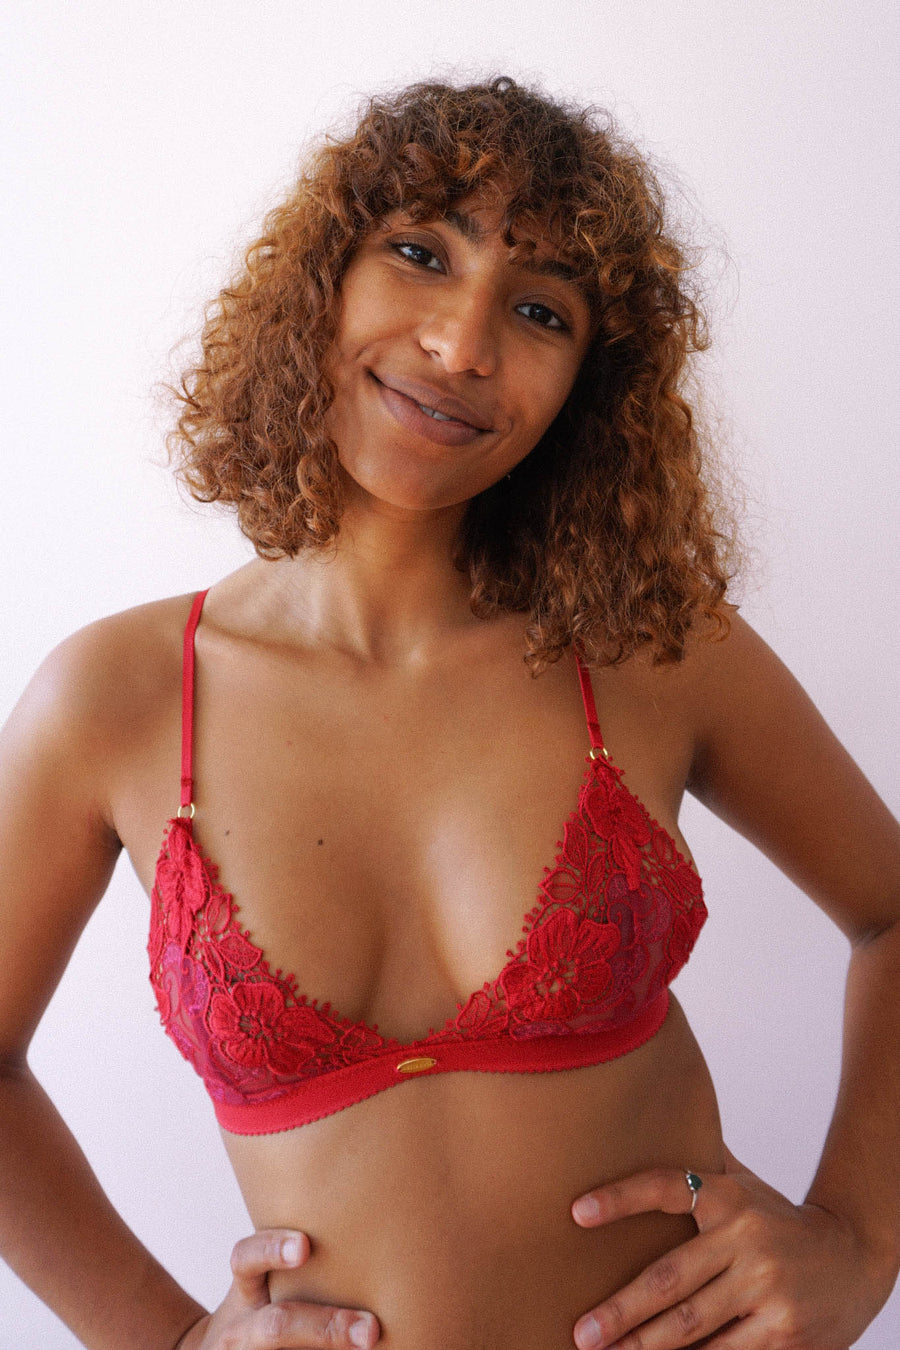 Buy Red Floral Lace Underwired Bra 32A, Bras